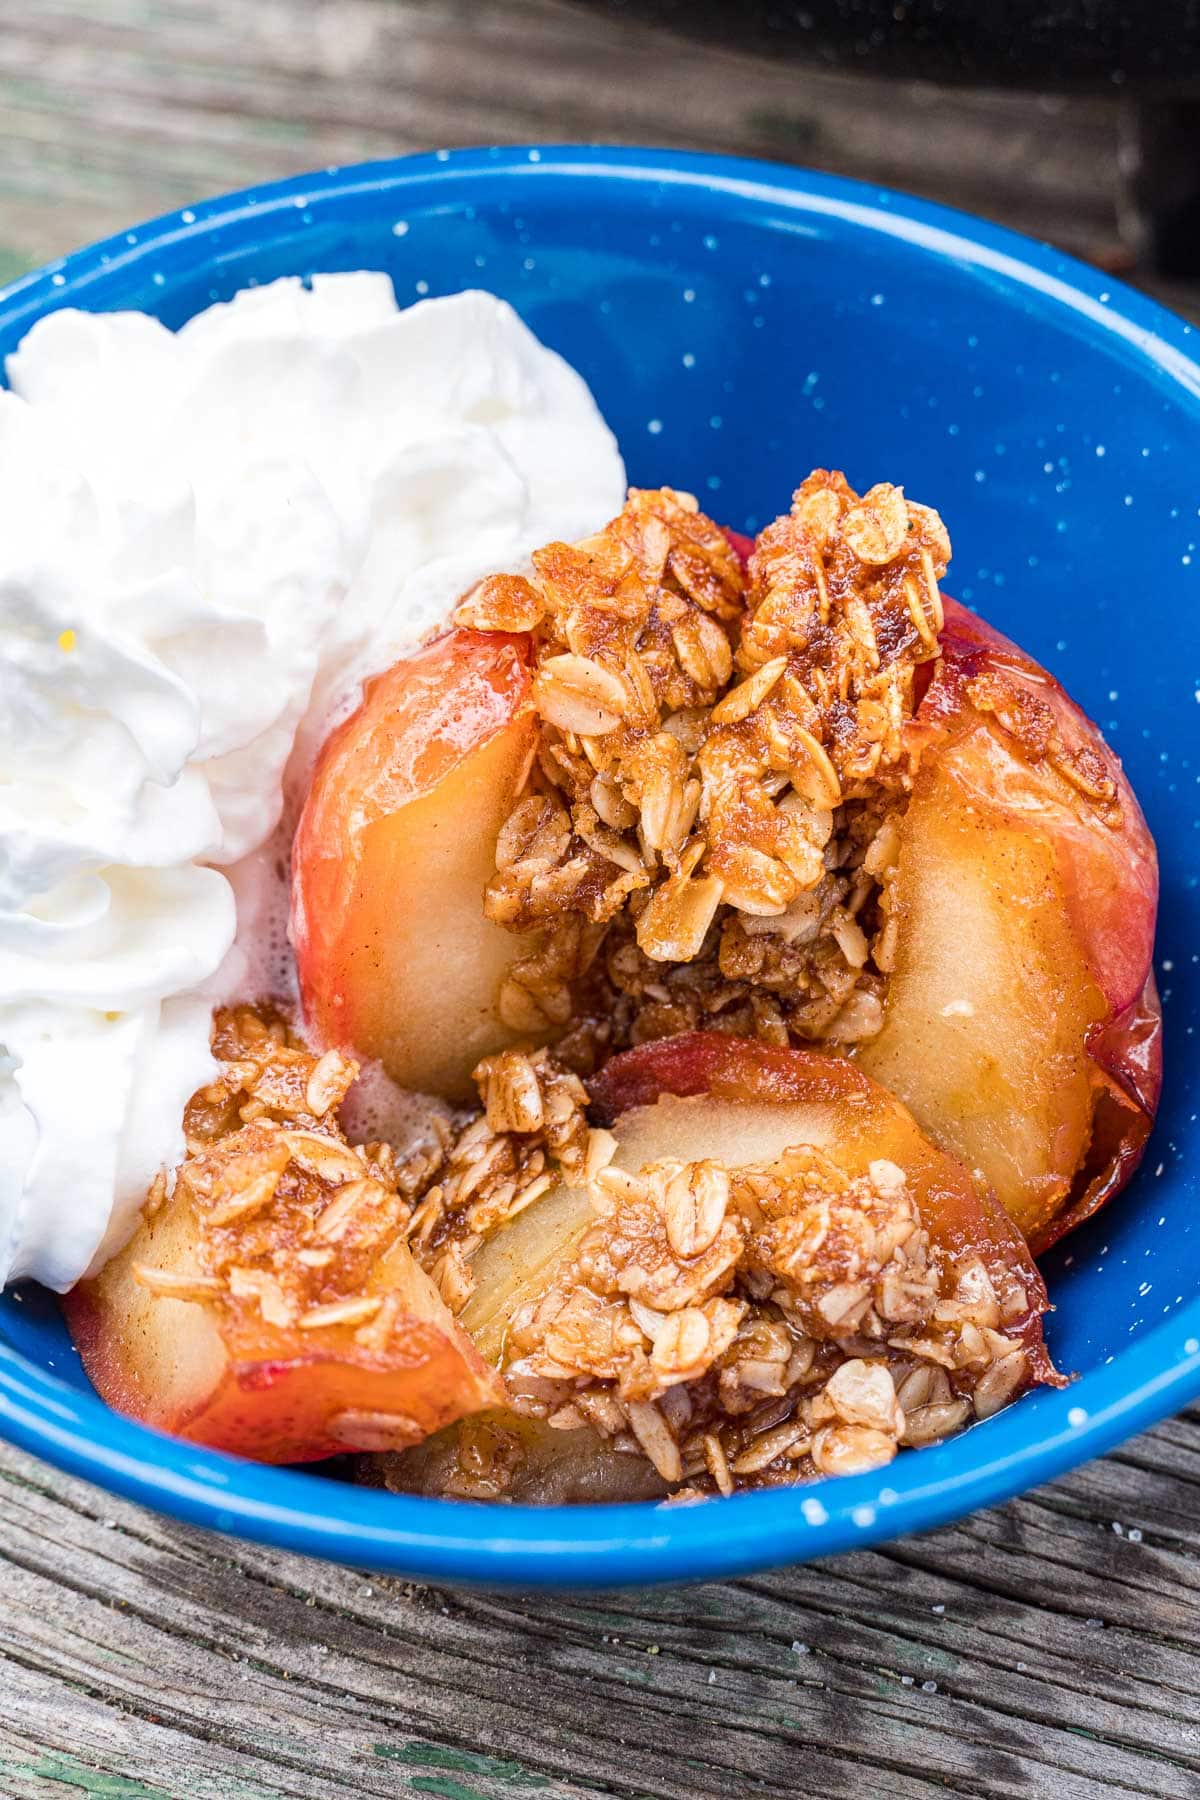 An apple filled with oats in a bowl of whipped cream.